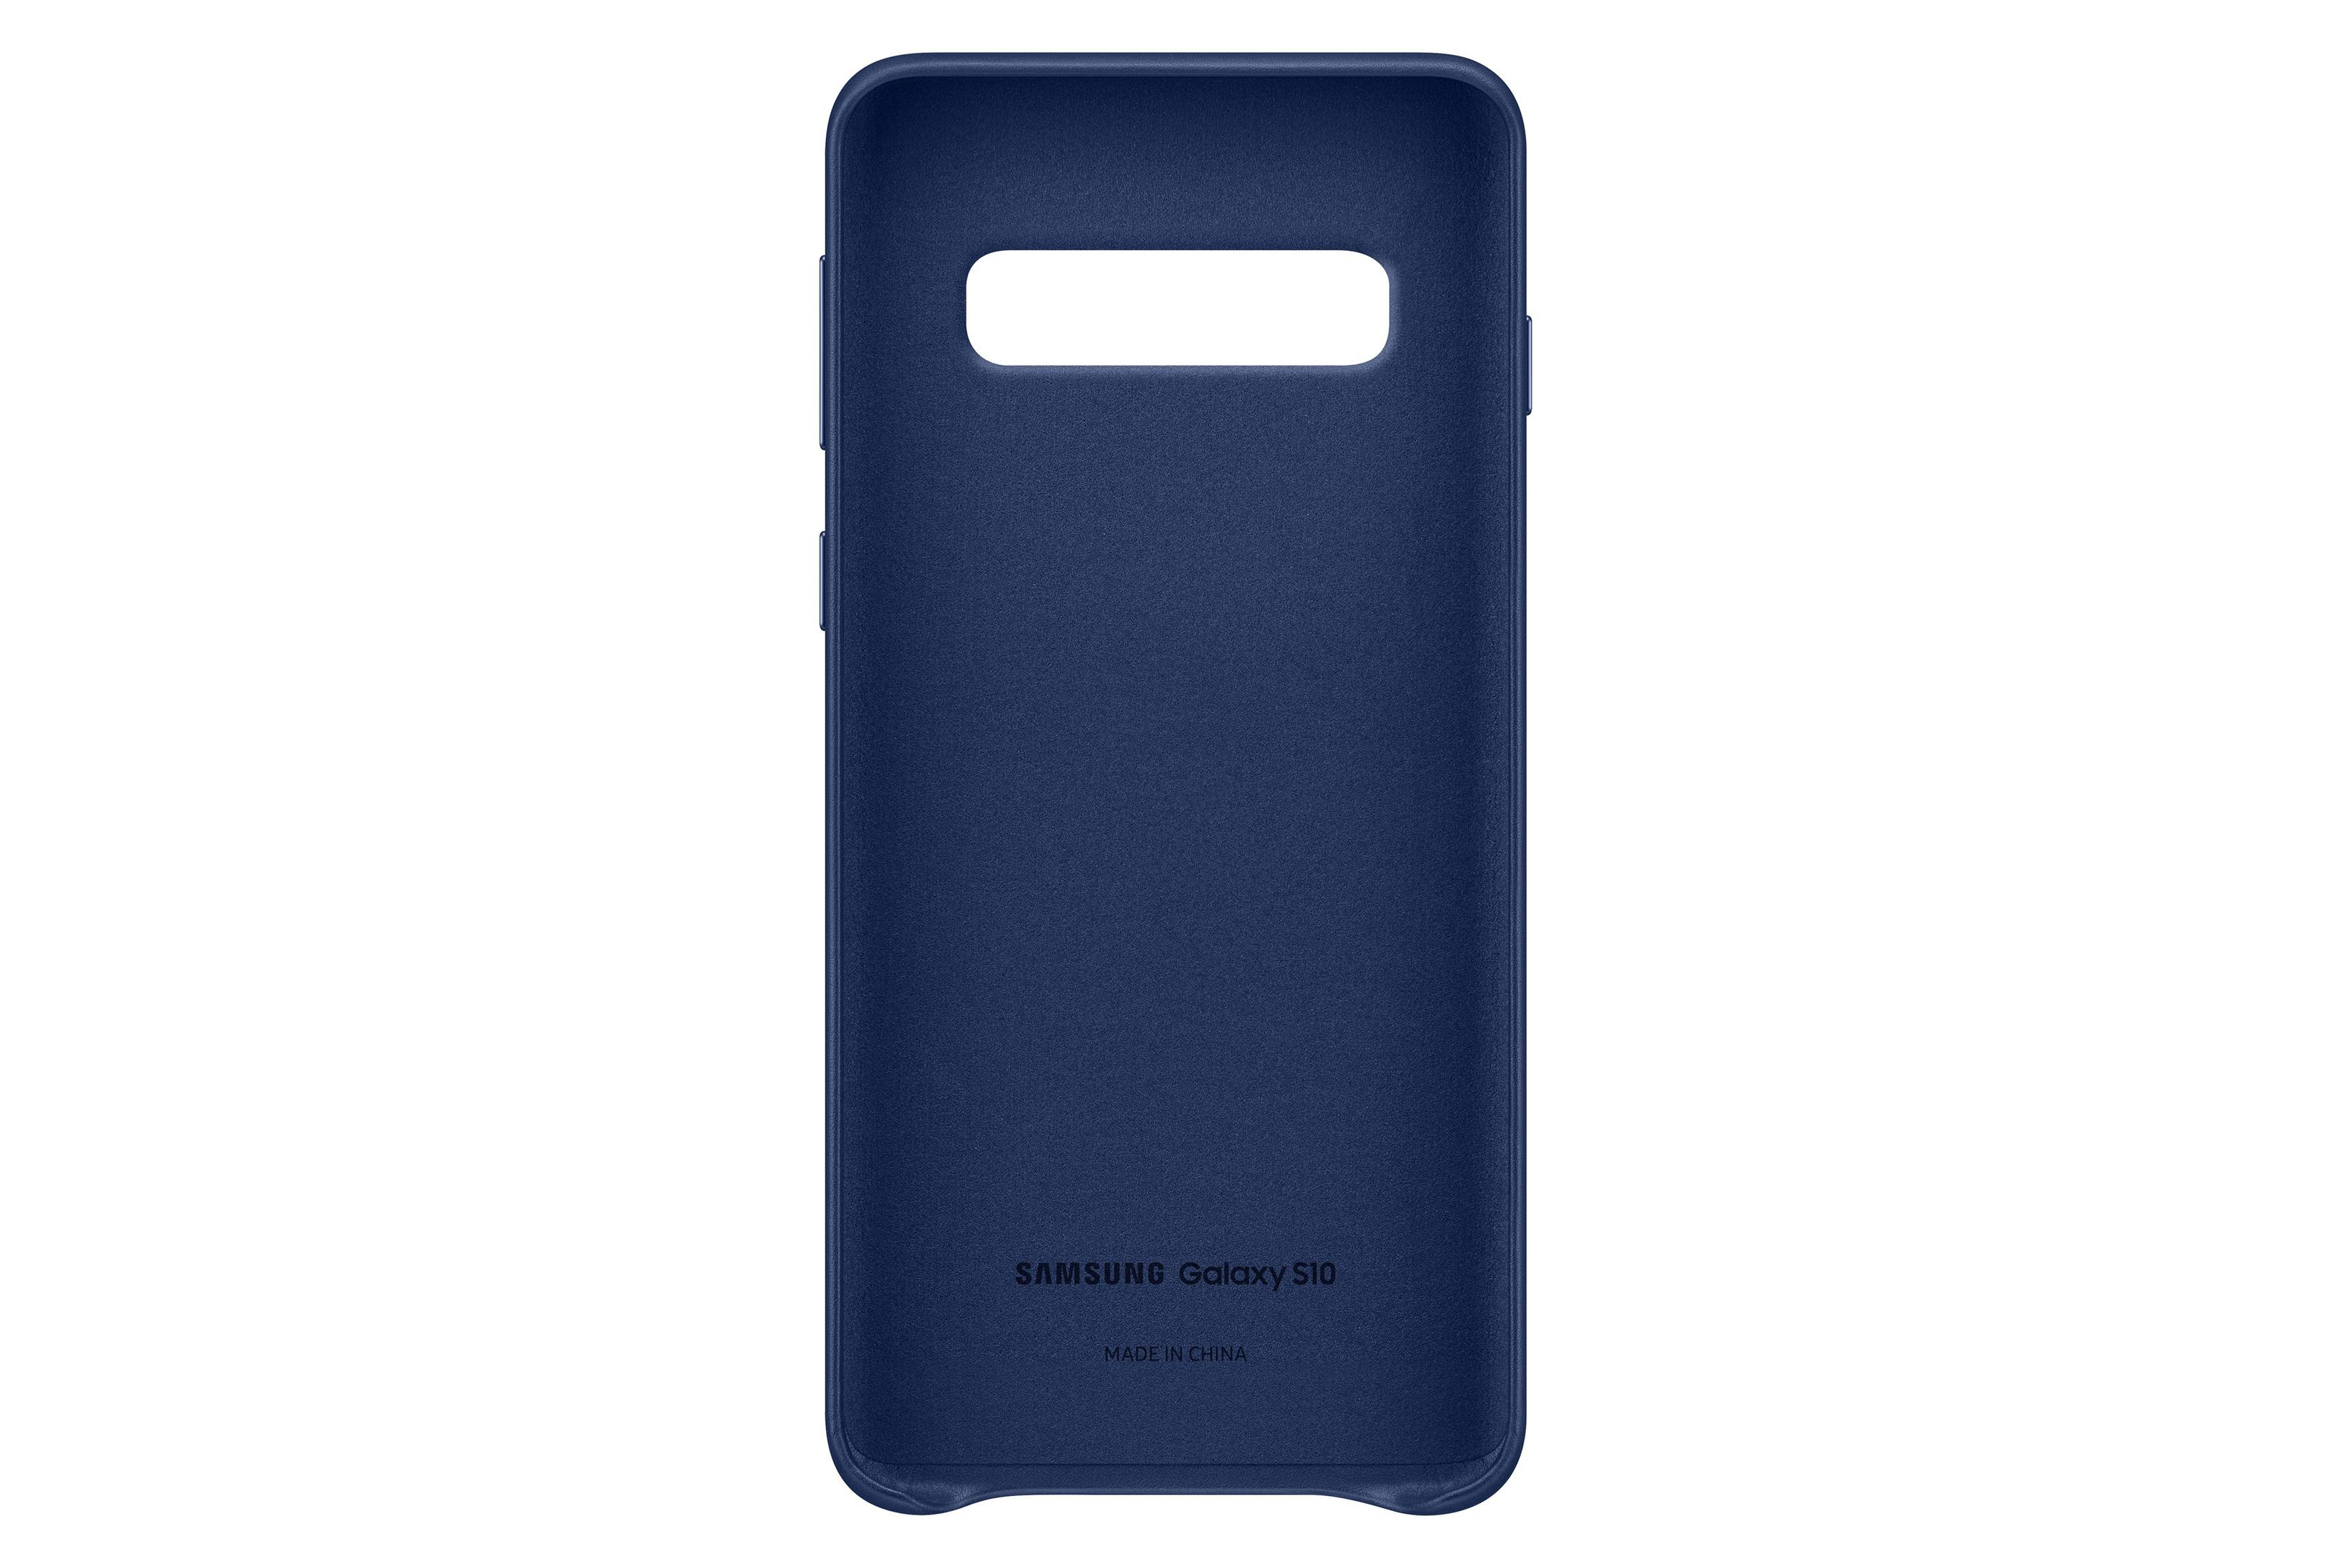 SAMSUNG EF-VG973LNEGWW S10 LEATHER COVER Samsung, Backcover, NAVY, Navy S10, Galaxy